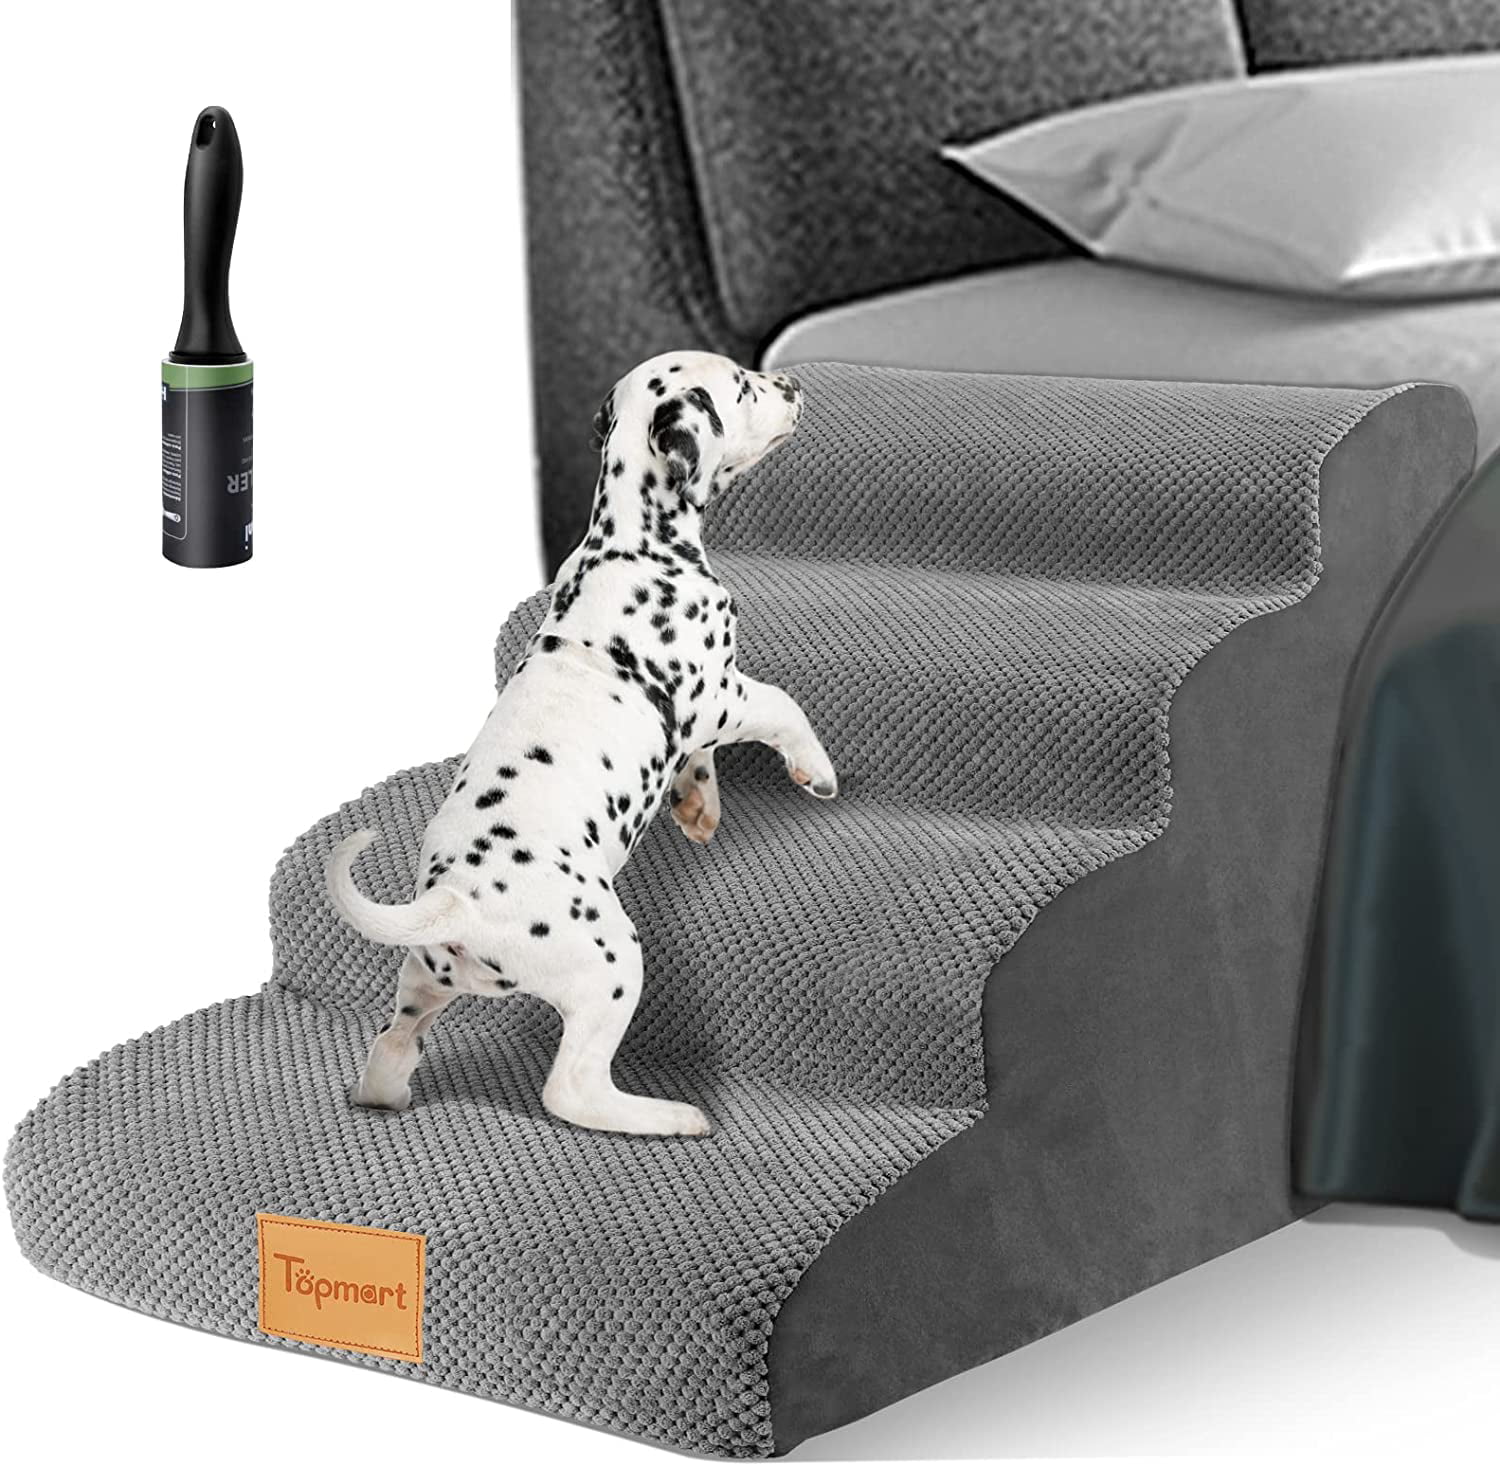 High-Density Dog Stairs Grey Best for Cats Injured Older Dogs Non-Slip Pet Ramps 2 Tiers Foam Steps for Dogs and Cats Send 1 Rope Toy A.FATI Foam Pet Stairs Dog Stairs for High Beds 